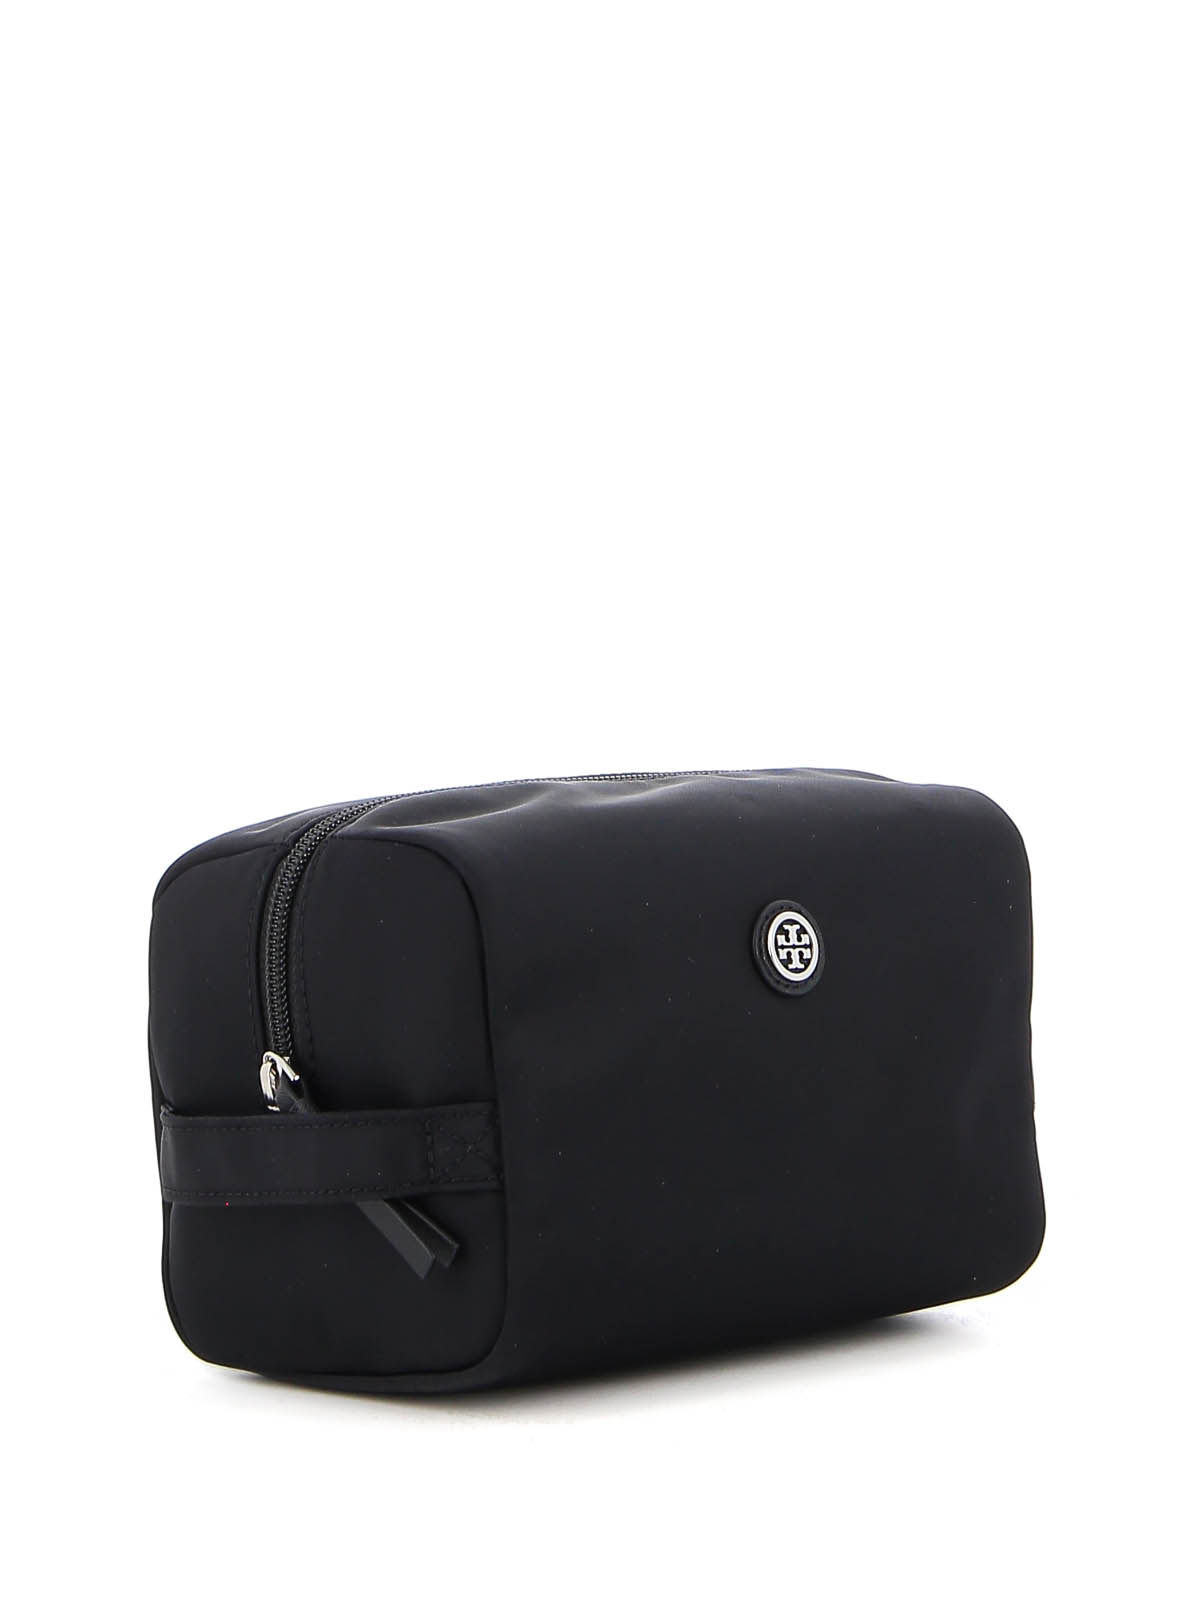 Cases & Covers Tory Burch - Virginia large cosmetic case - 84999001